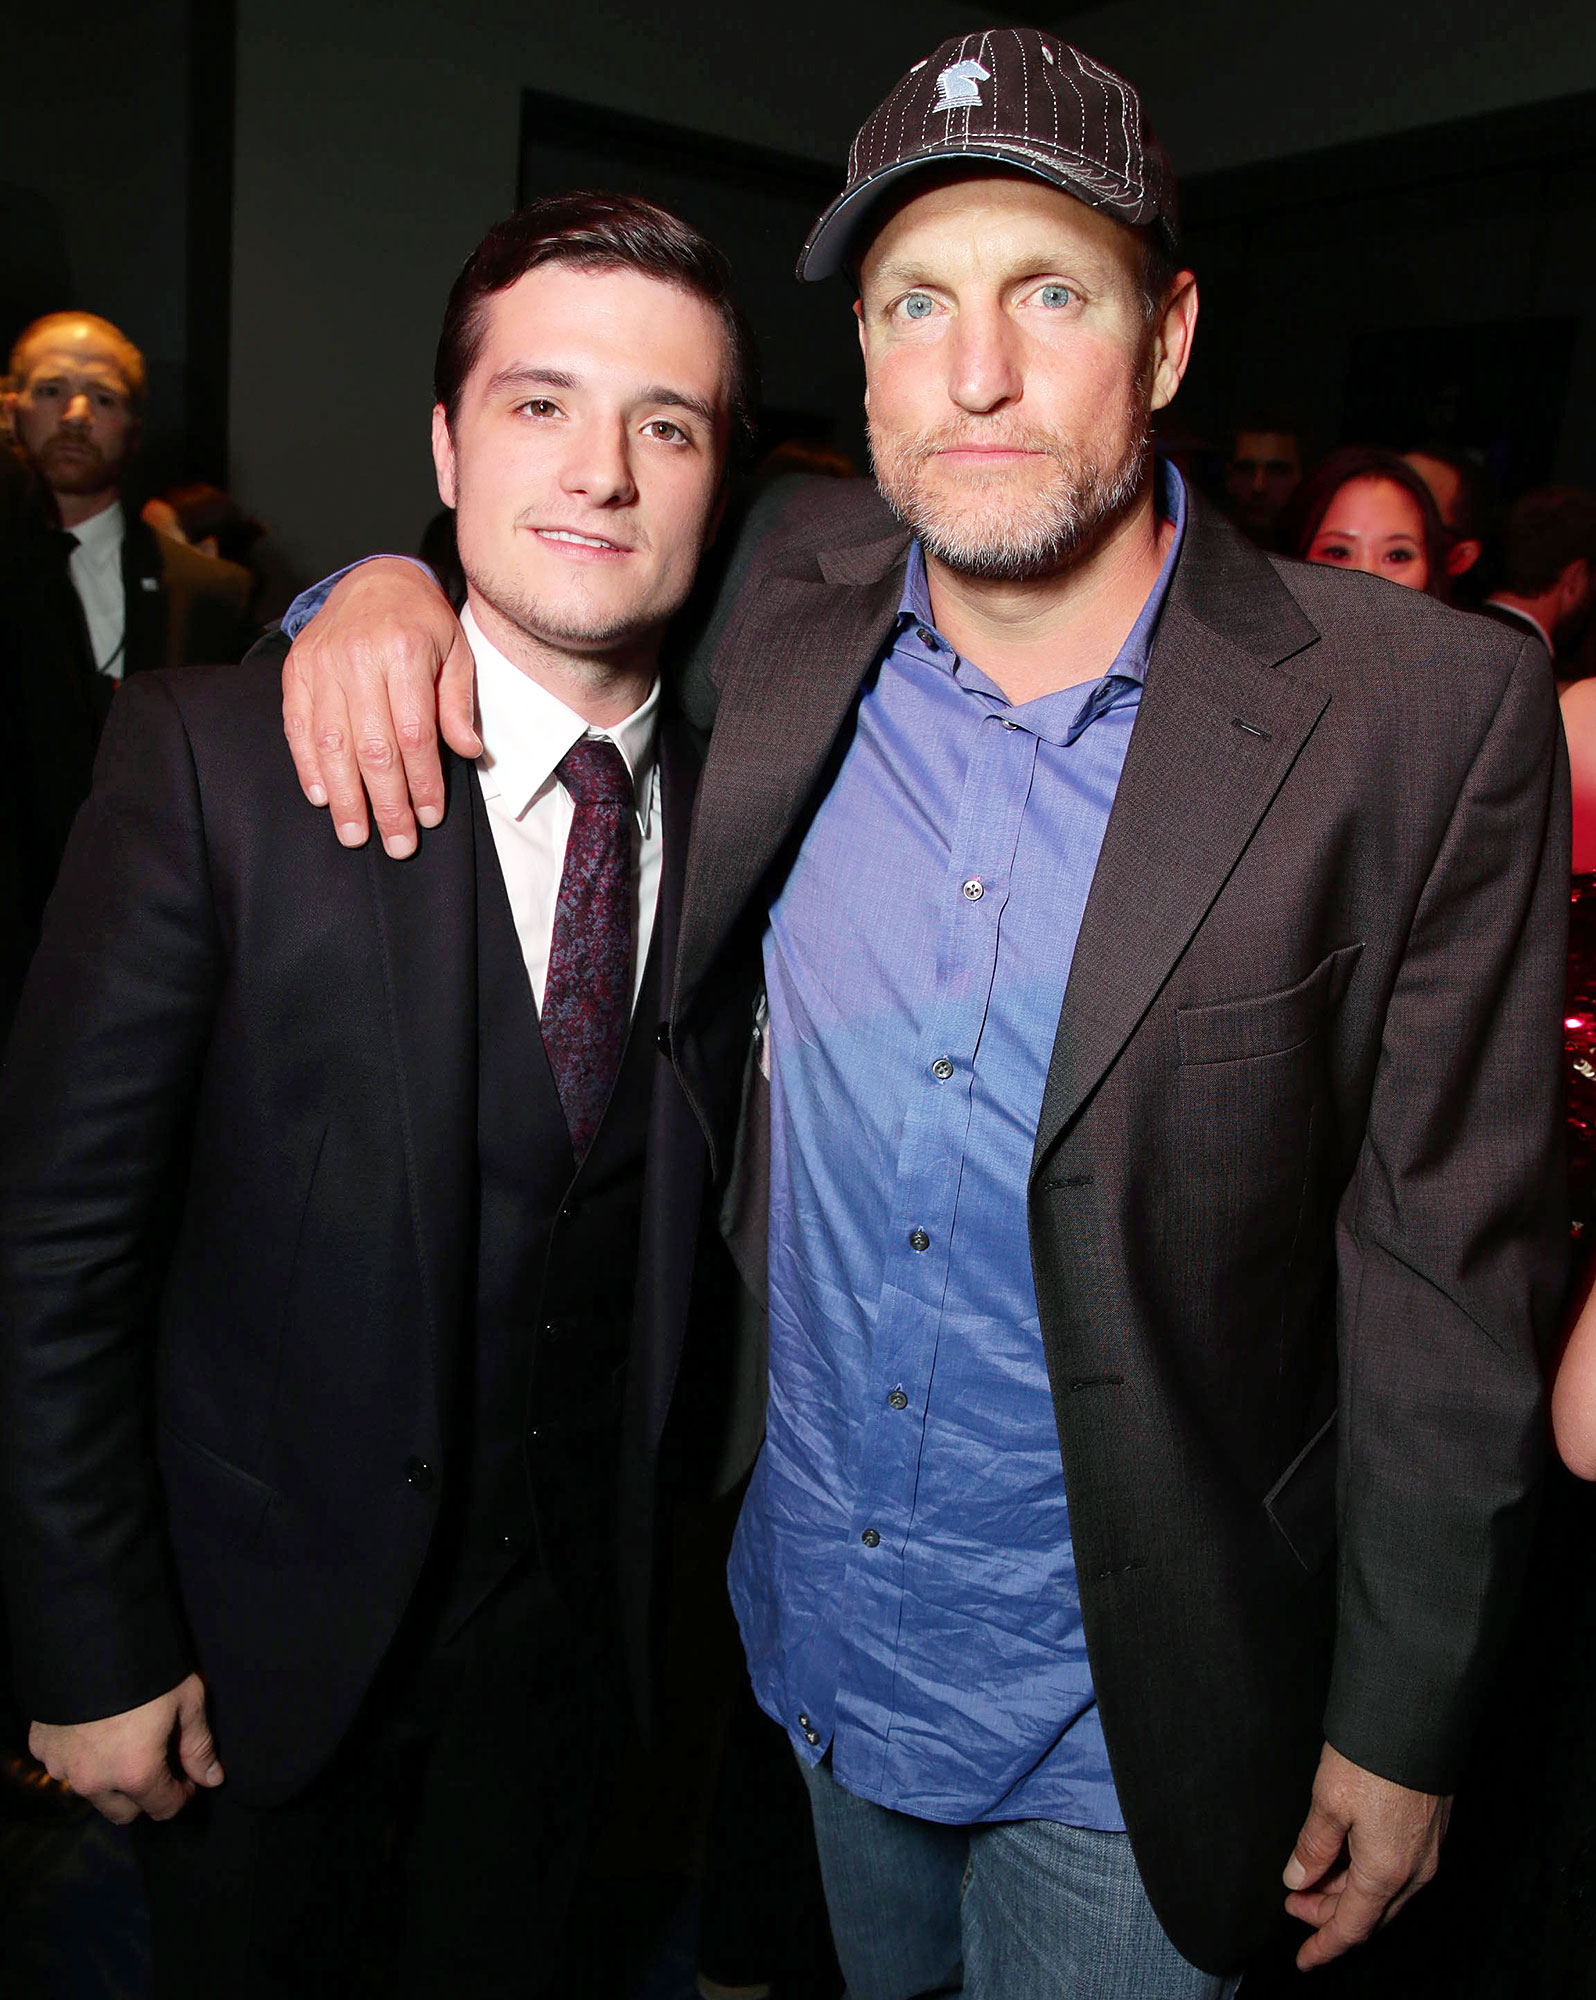 Trading Places! Josh Hutcherson Wants to Change Bodies With This Costar ...